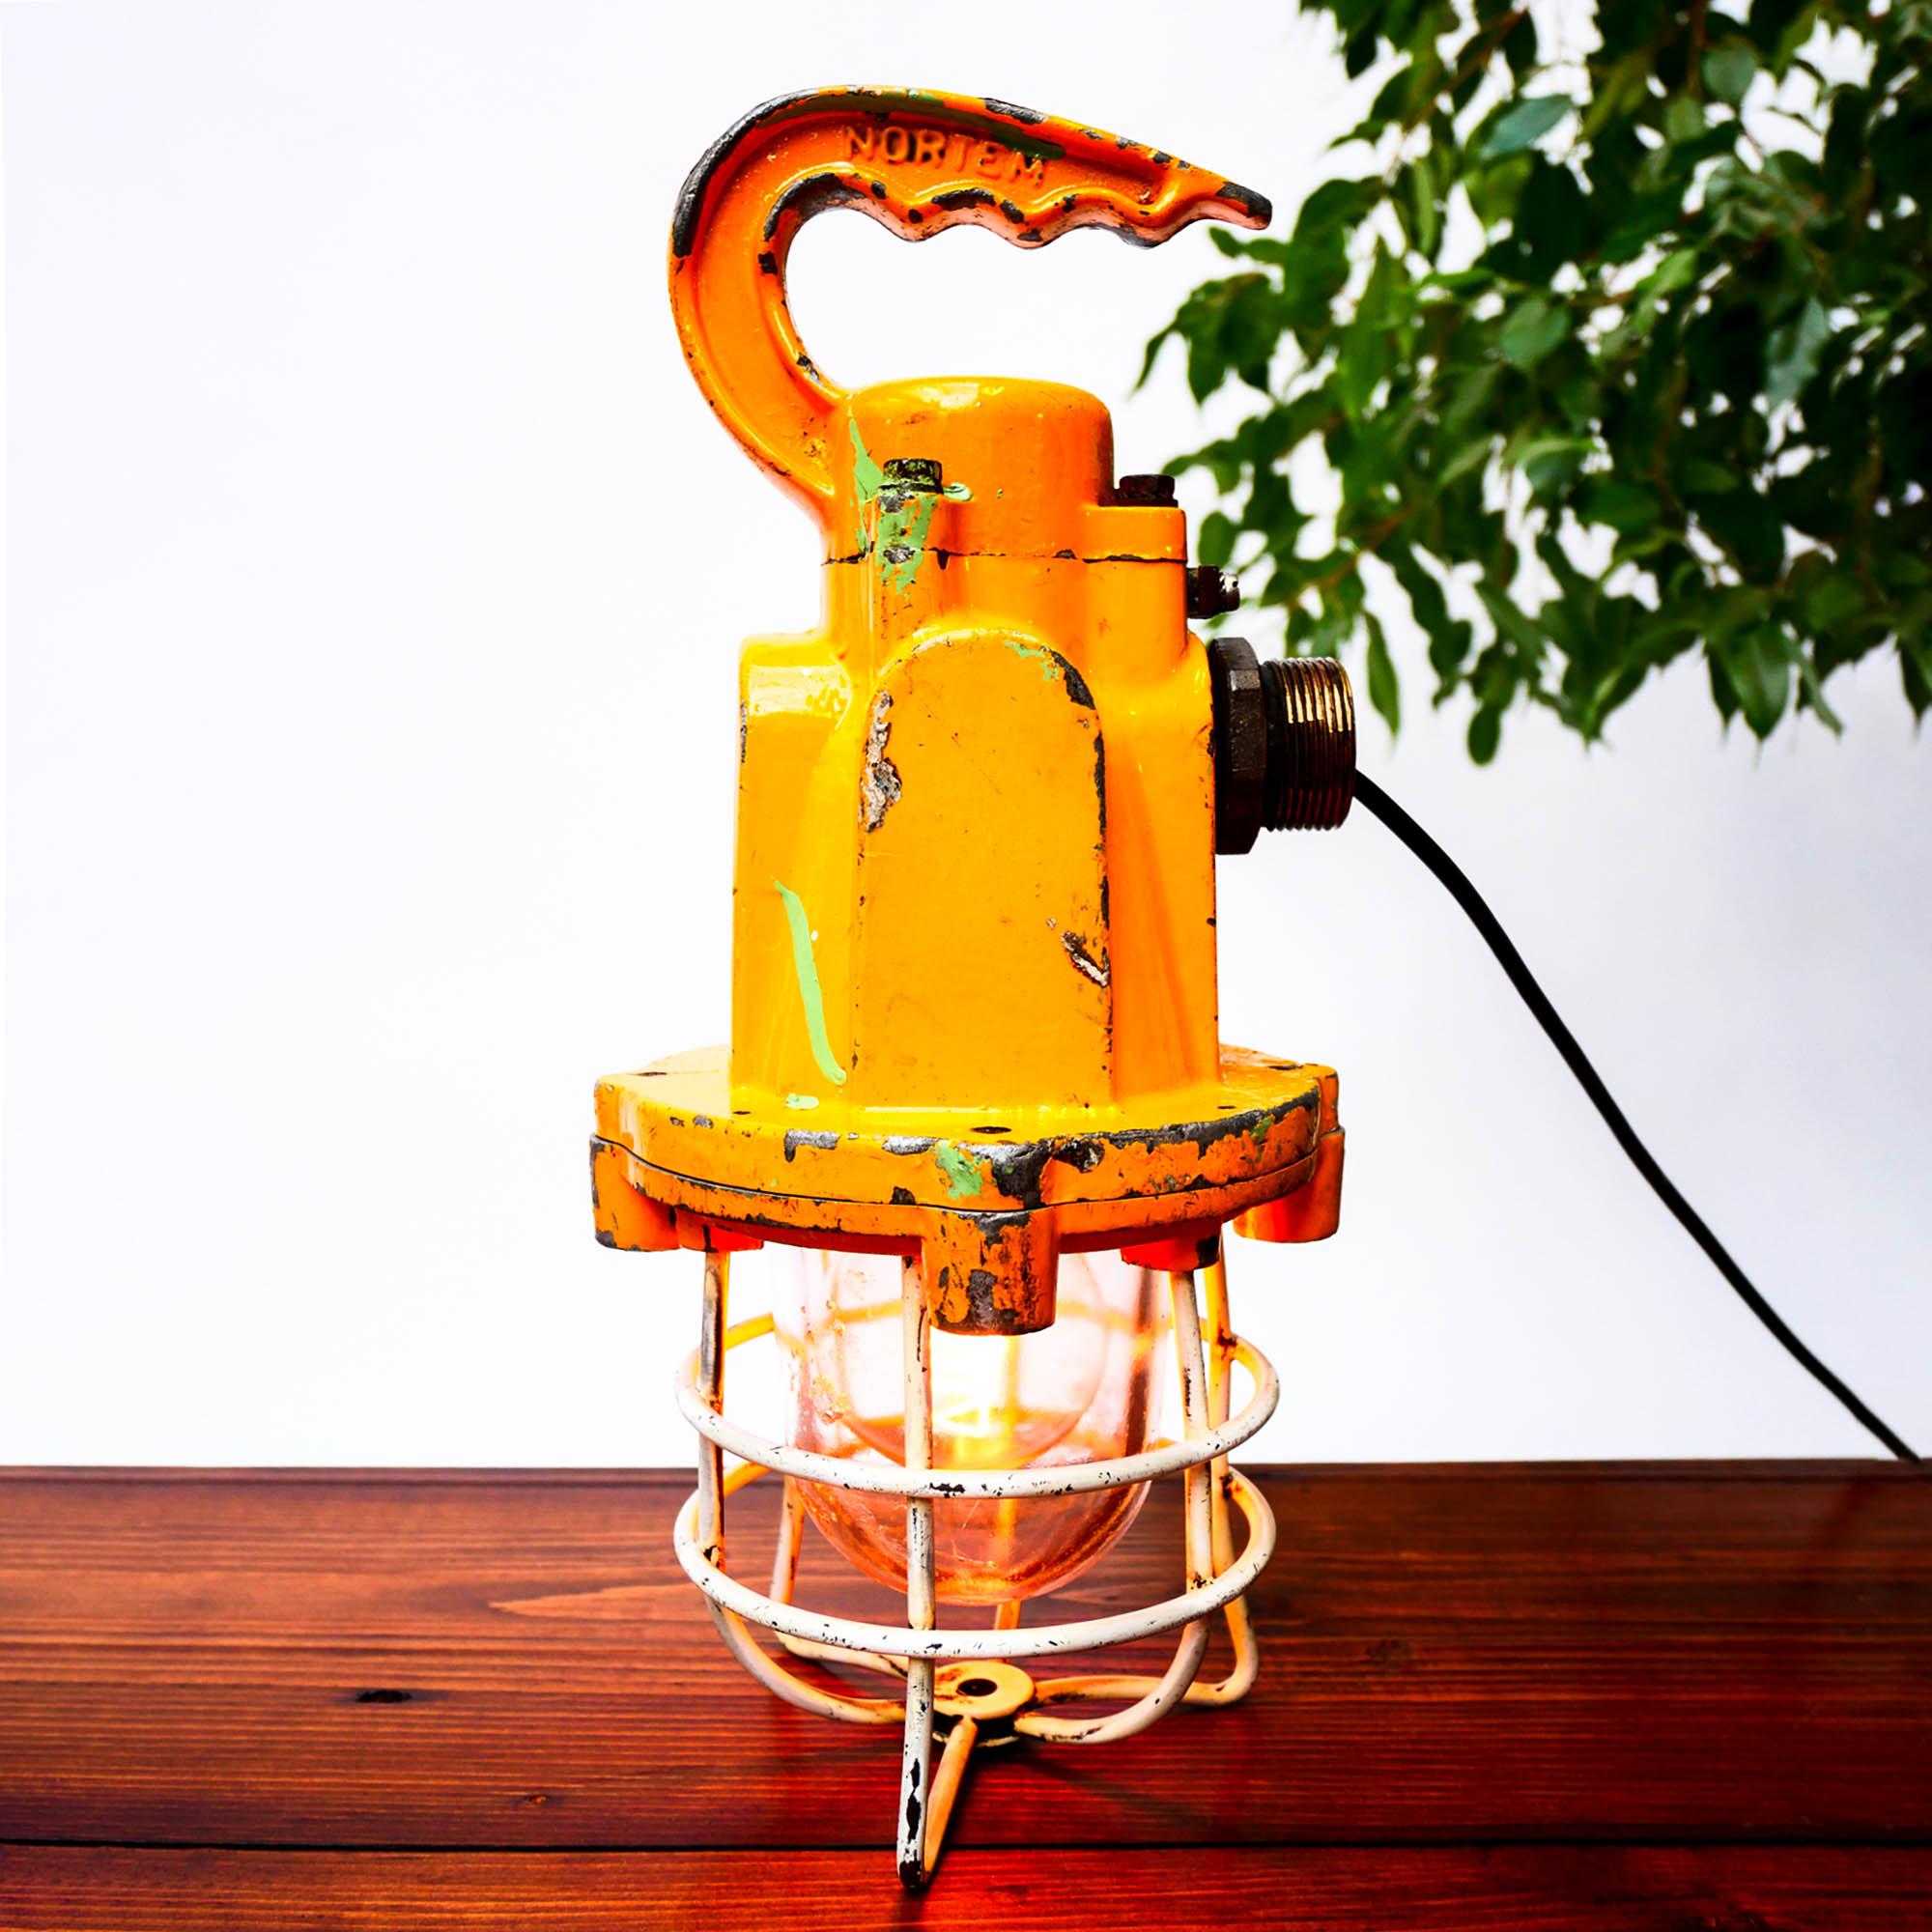 Vintage inspection lamp, made of cast iron aluminium. Original yellow color! Nice model with a robust and elegant handle. Can be put on a table or used as a ceiling lamp!